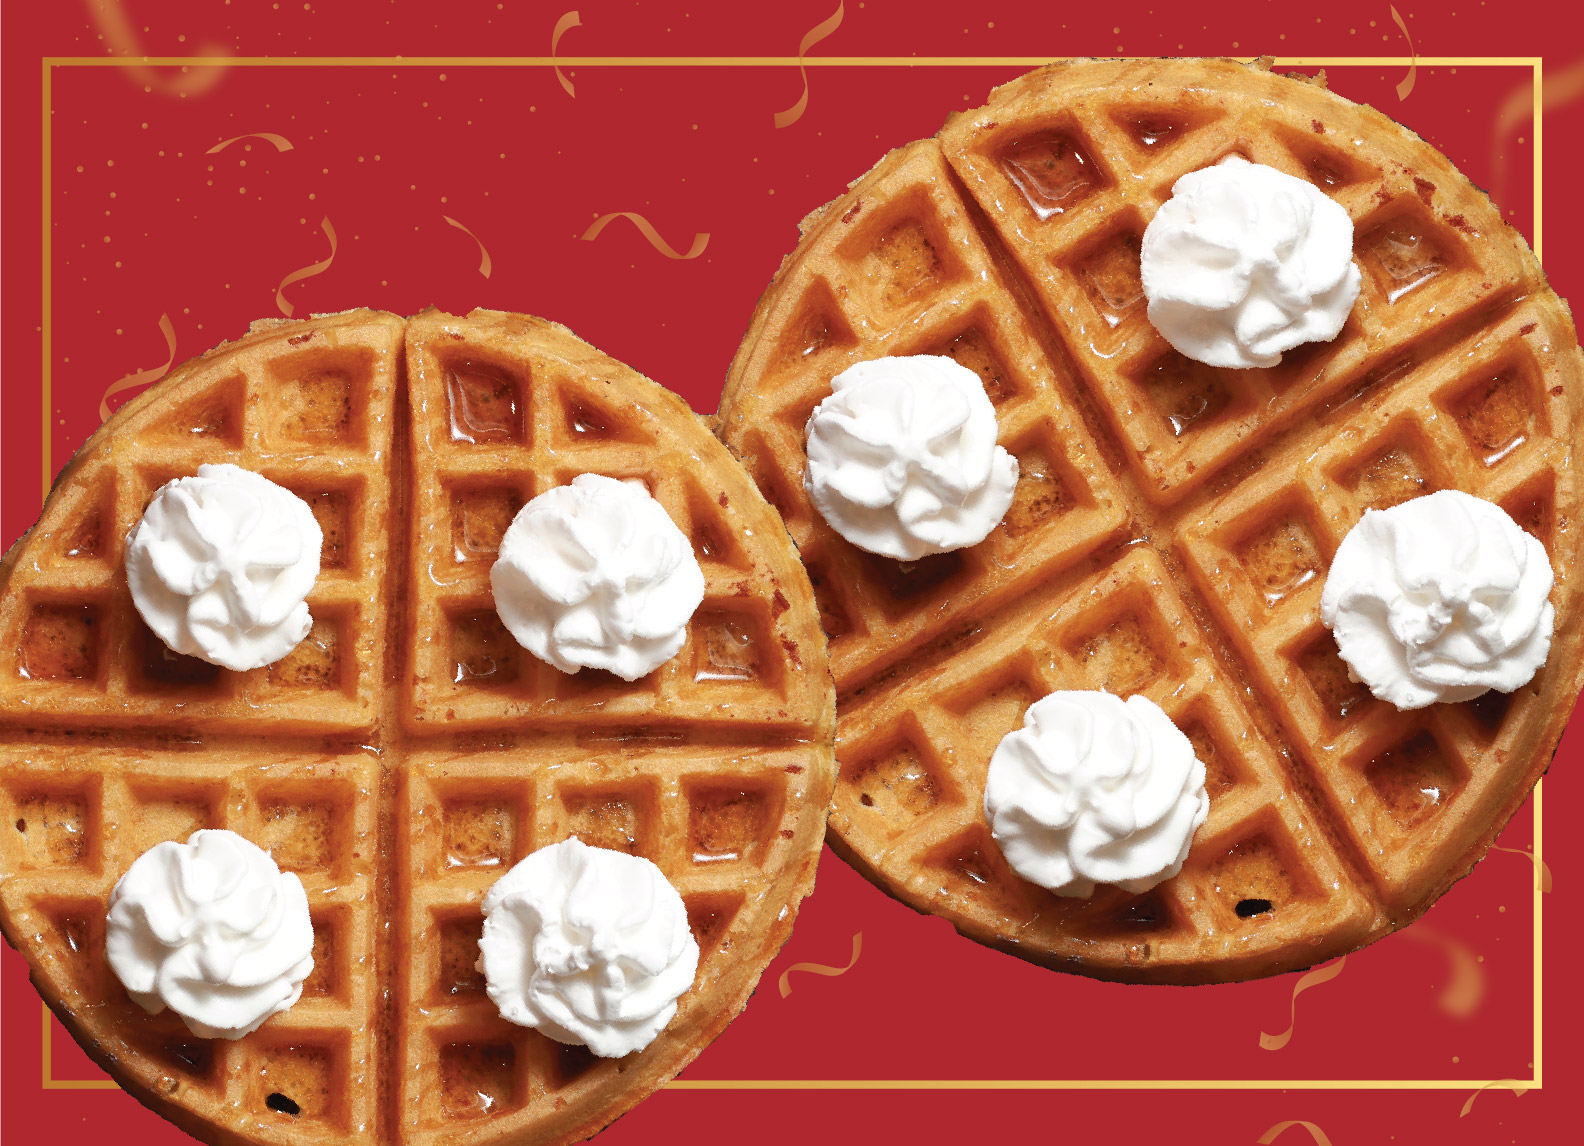 Get 2nd Classic Waffle at 50% off